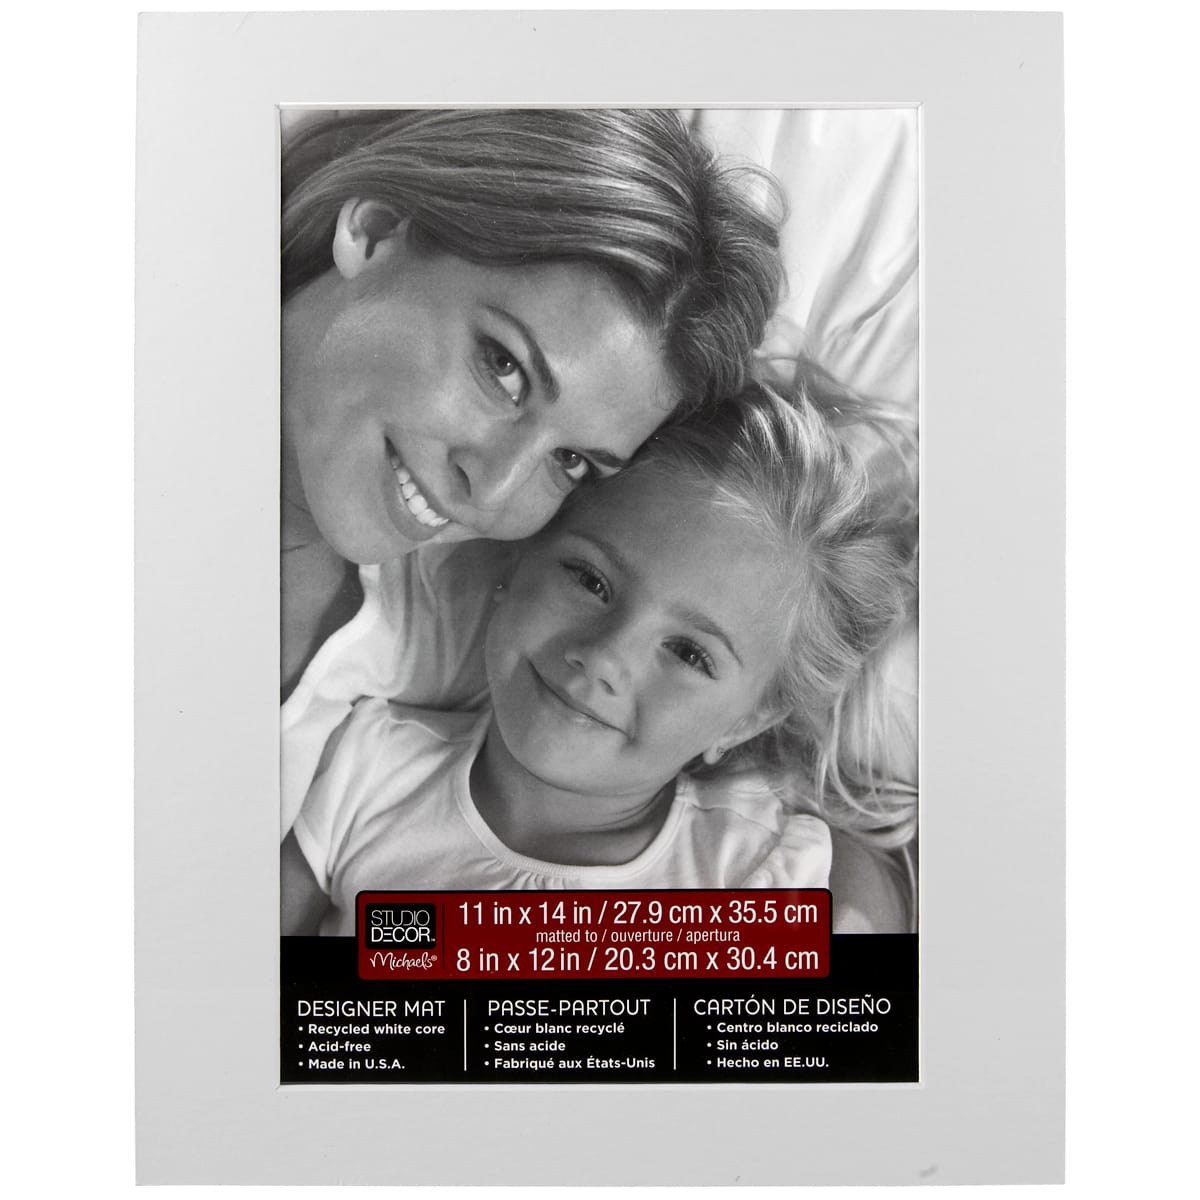 10x12 Mat for 8x10 Photo - Precut White with Black Core Picture Matboard  for Frames Measuring 10 x 12 Inches - Bevel Cut Matte to Display Art